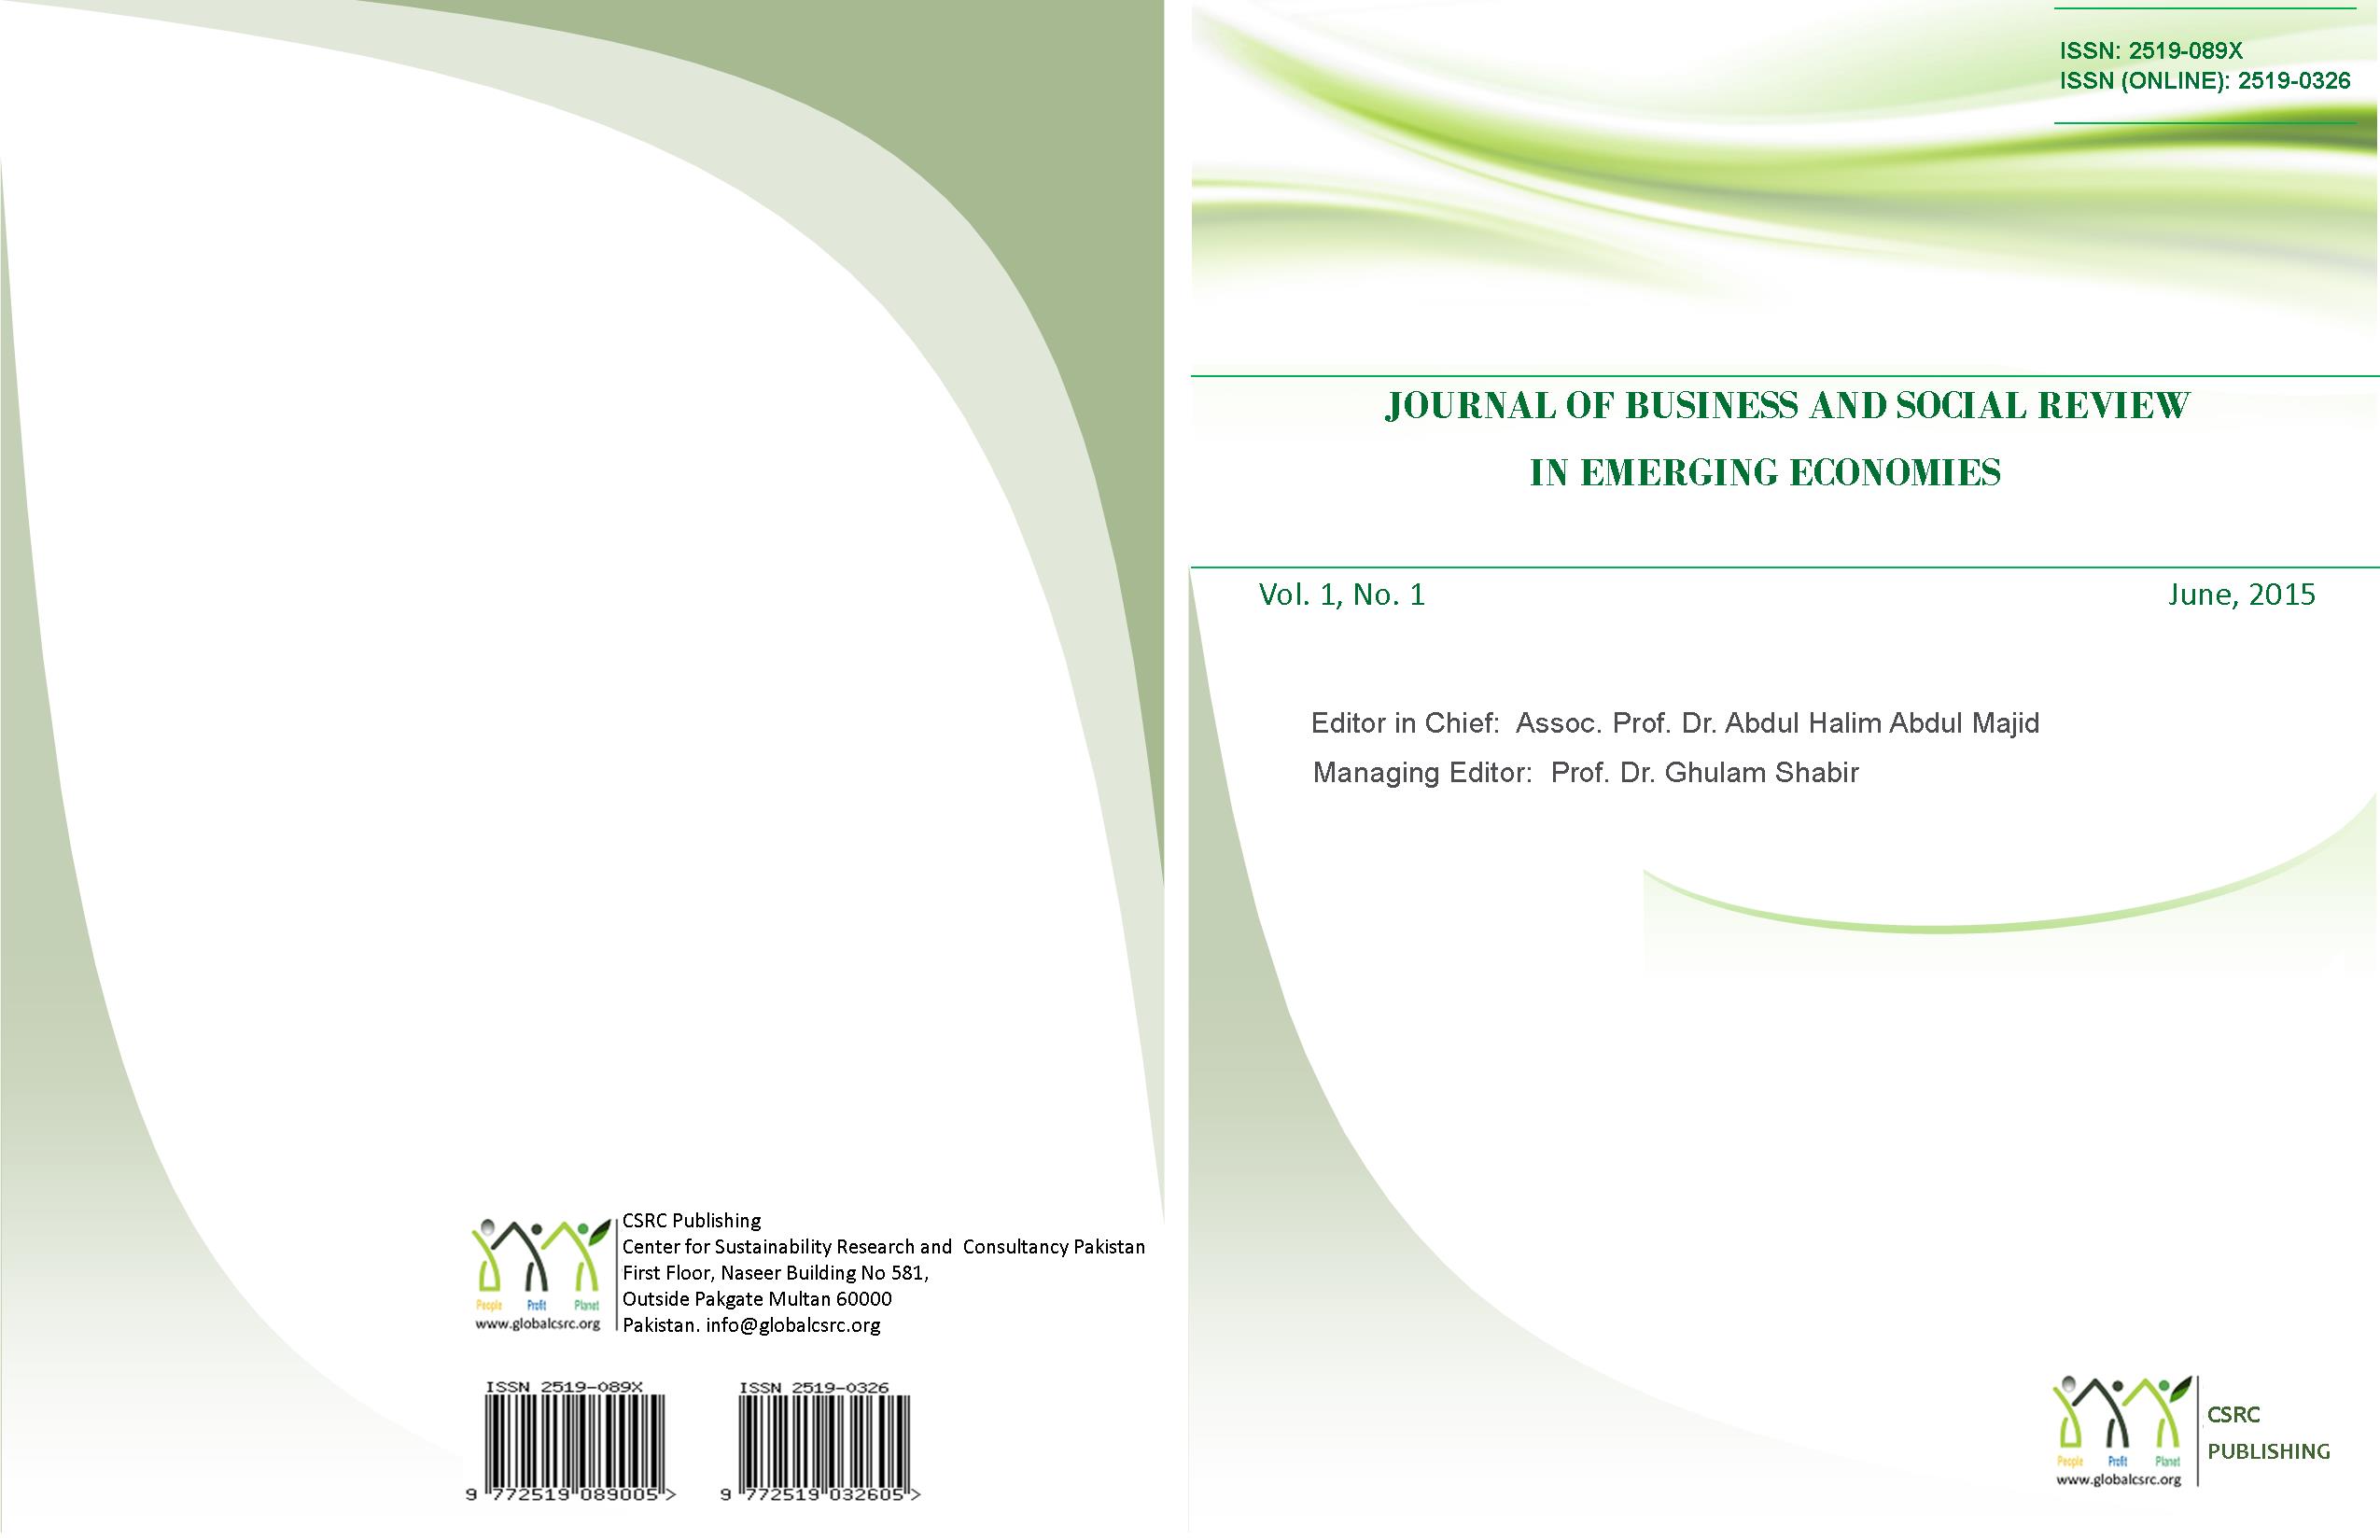 Journal of Business and Social Review in Emerging Economies, Vol 1, No. 1, June 2015